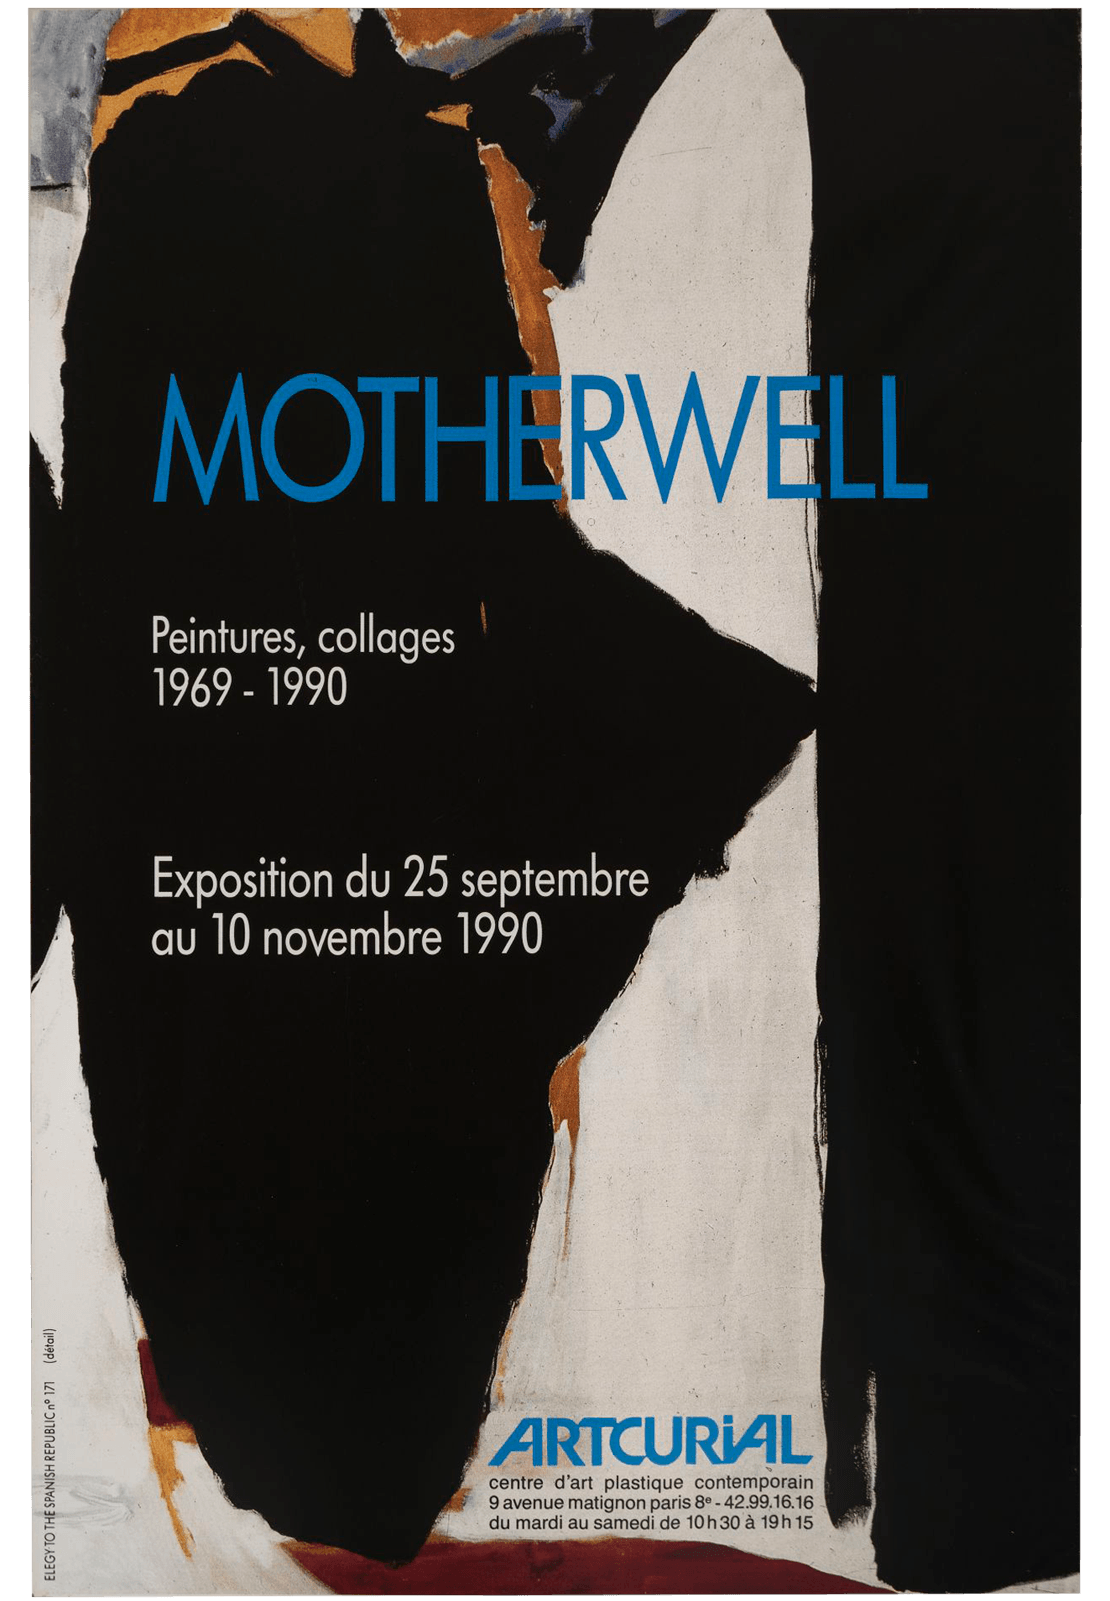 Artcurial Poster for Motherwell "Peintures Collages 1969-1990." Features blue and white text overlaid on a detail image of a Motherwell Elegy painting.